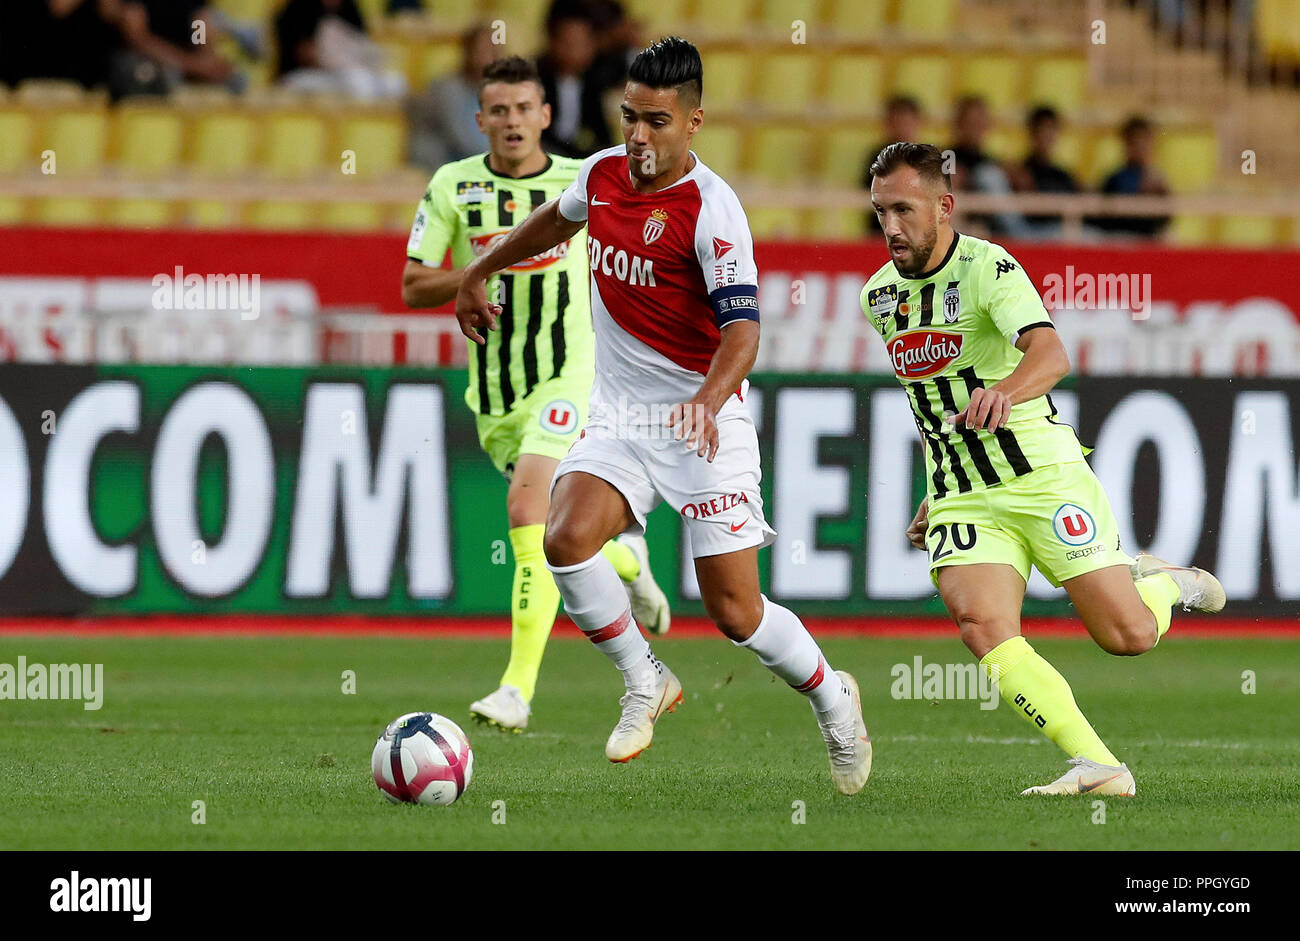 Fontvieille. 25th Sep, 2018. Flavien Tait (R) of Angers vies with Radamel Falcao of Monaco during the French Ligue 1 seventh round match between Angers and Monaco in Fontvieille, Monaco on Sept. 25, 2018. Angers won 1-0. Credit: Marco Fino/Xinhua/Alamy Live News Stock Photo